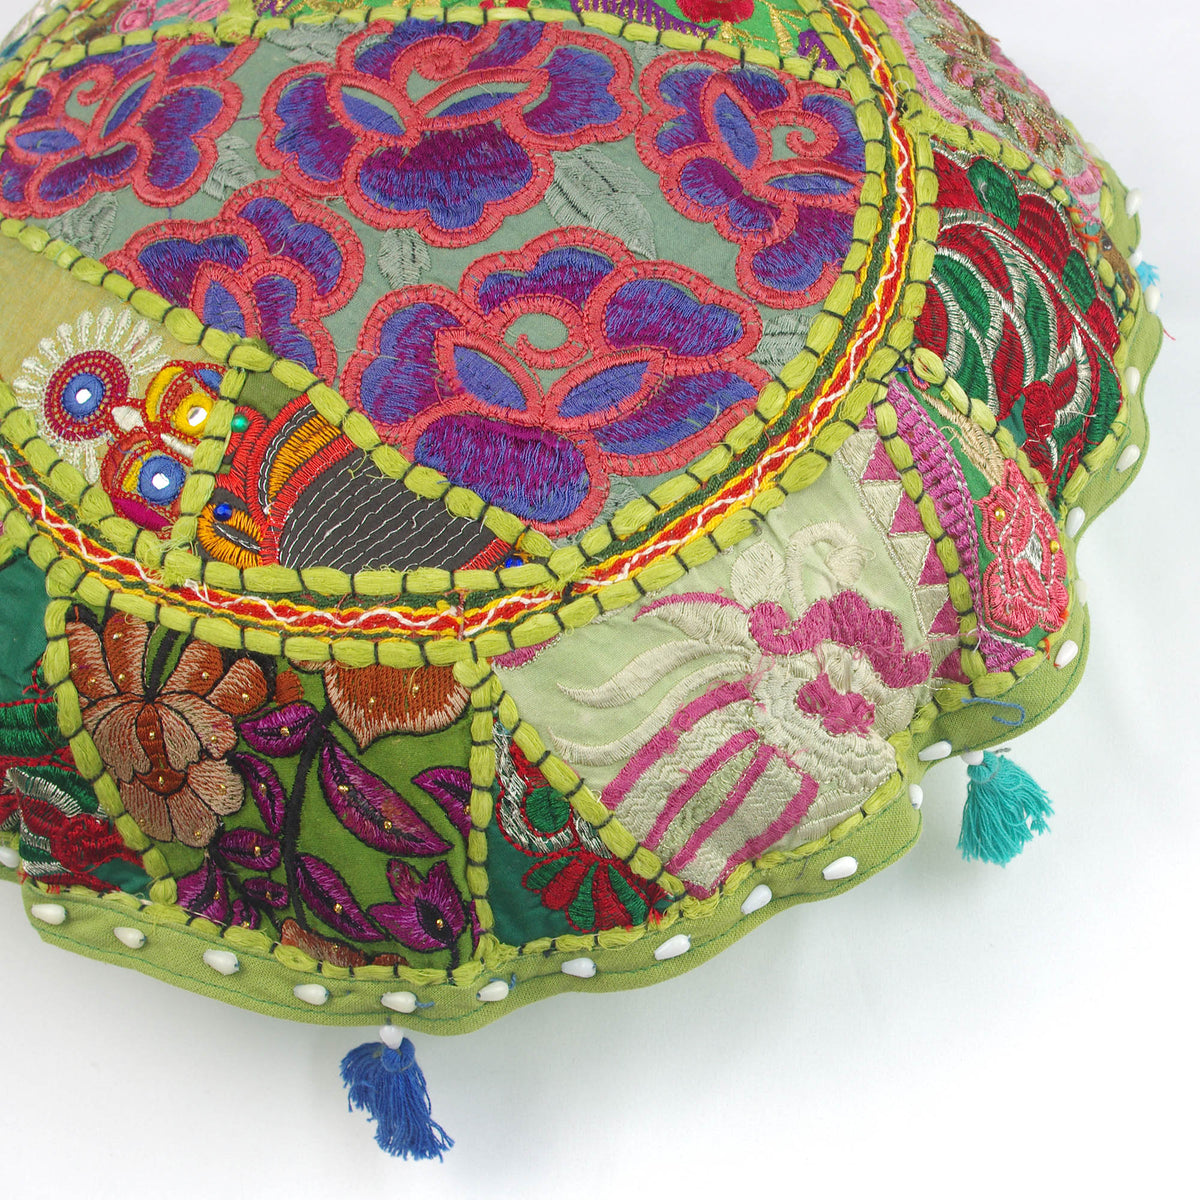 Green Round Floor Embroidered Patchwork Pouf Ottoman Indian Vintage Cushion Cover 18"